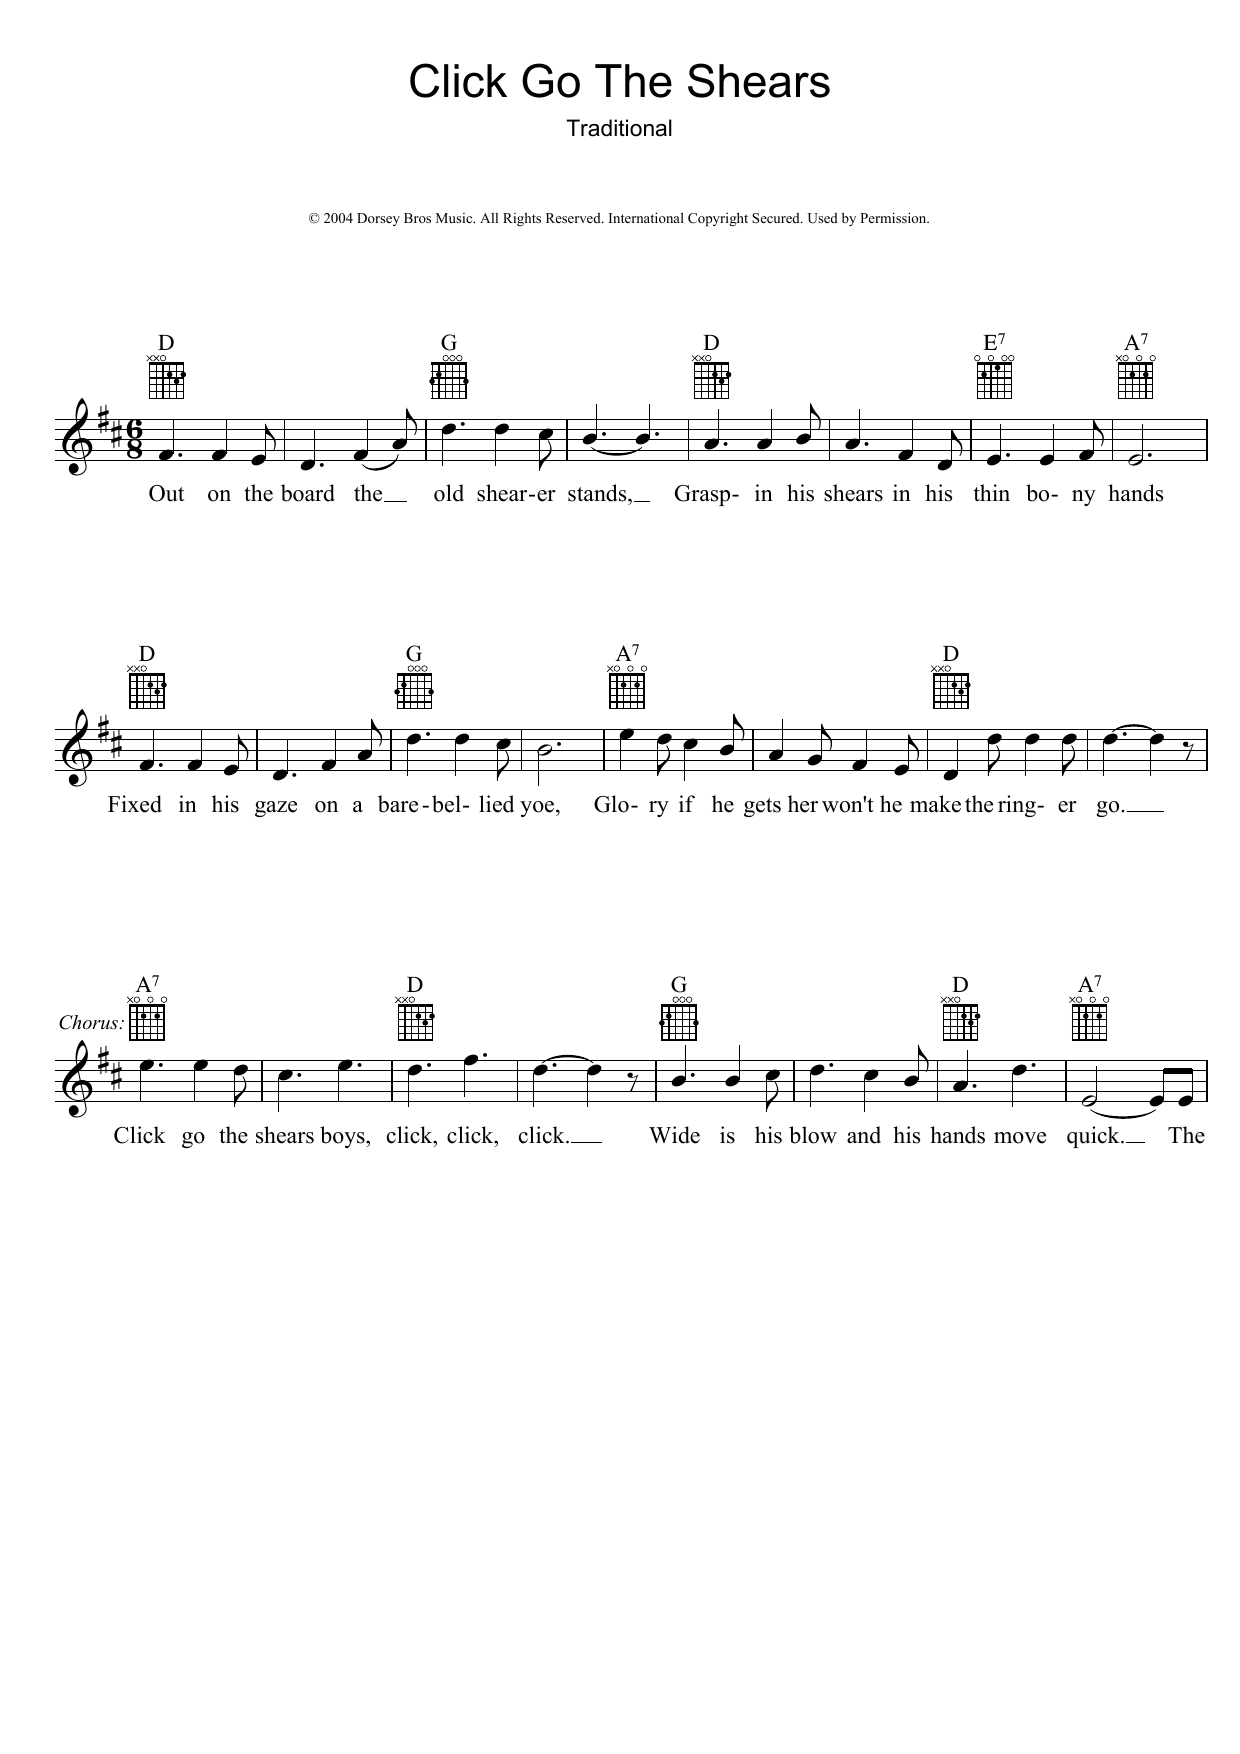 Download Traditional Click Go The Shears Sheet Music